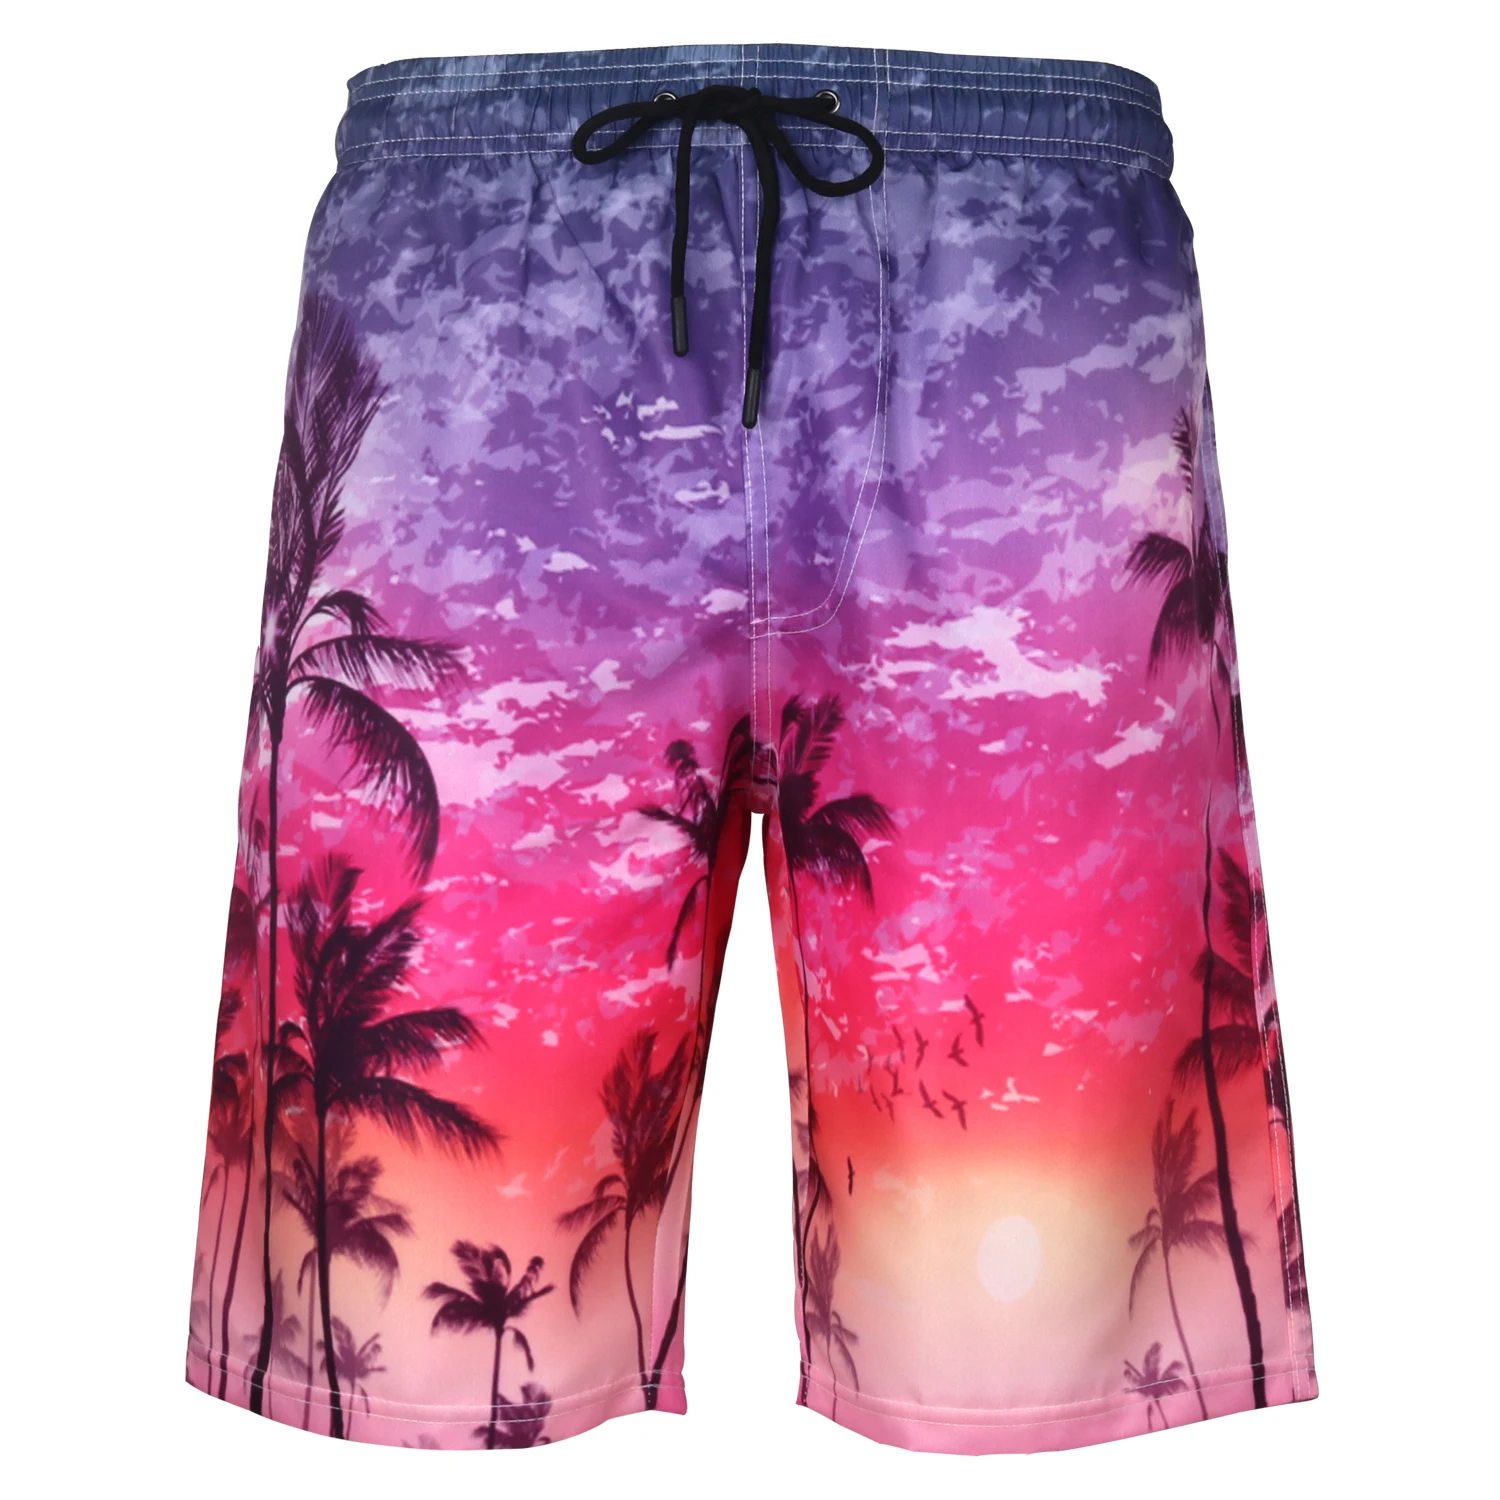 

mens beach shorts supplier Personalised swimwear trunks board shorts surfing, Printed brilliantly